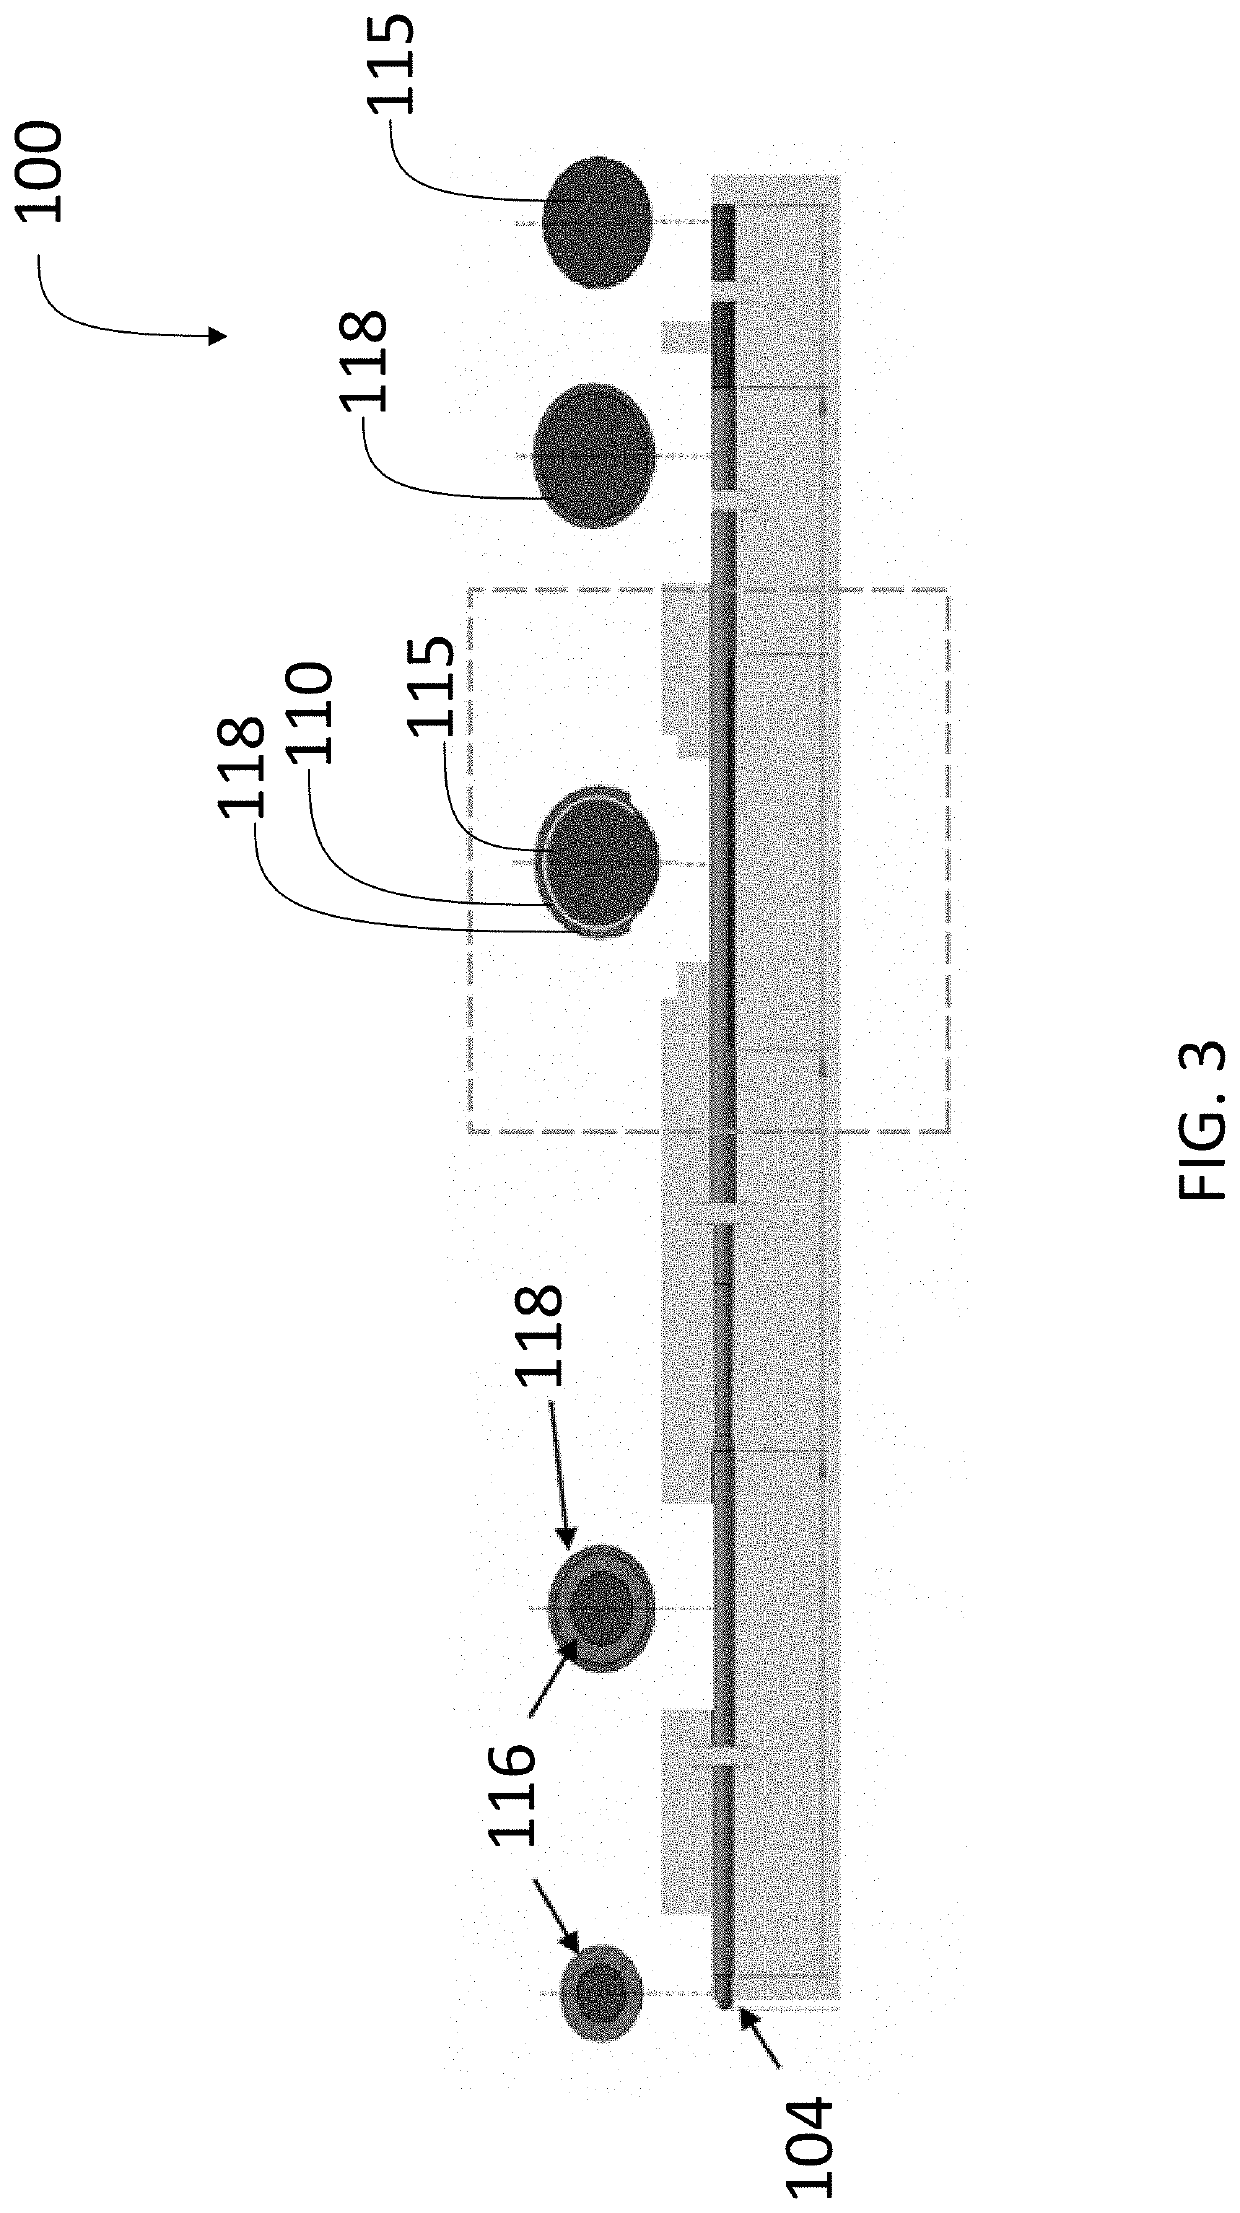 Tissue excision, cutting, and removal systems and methods